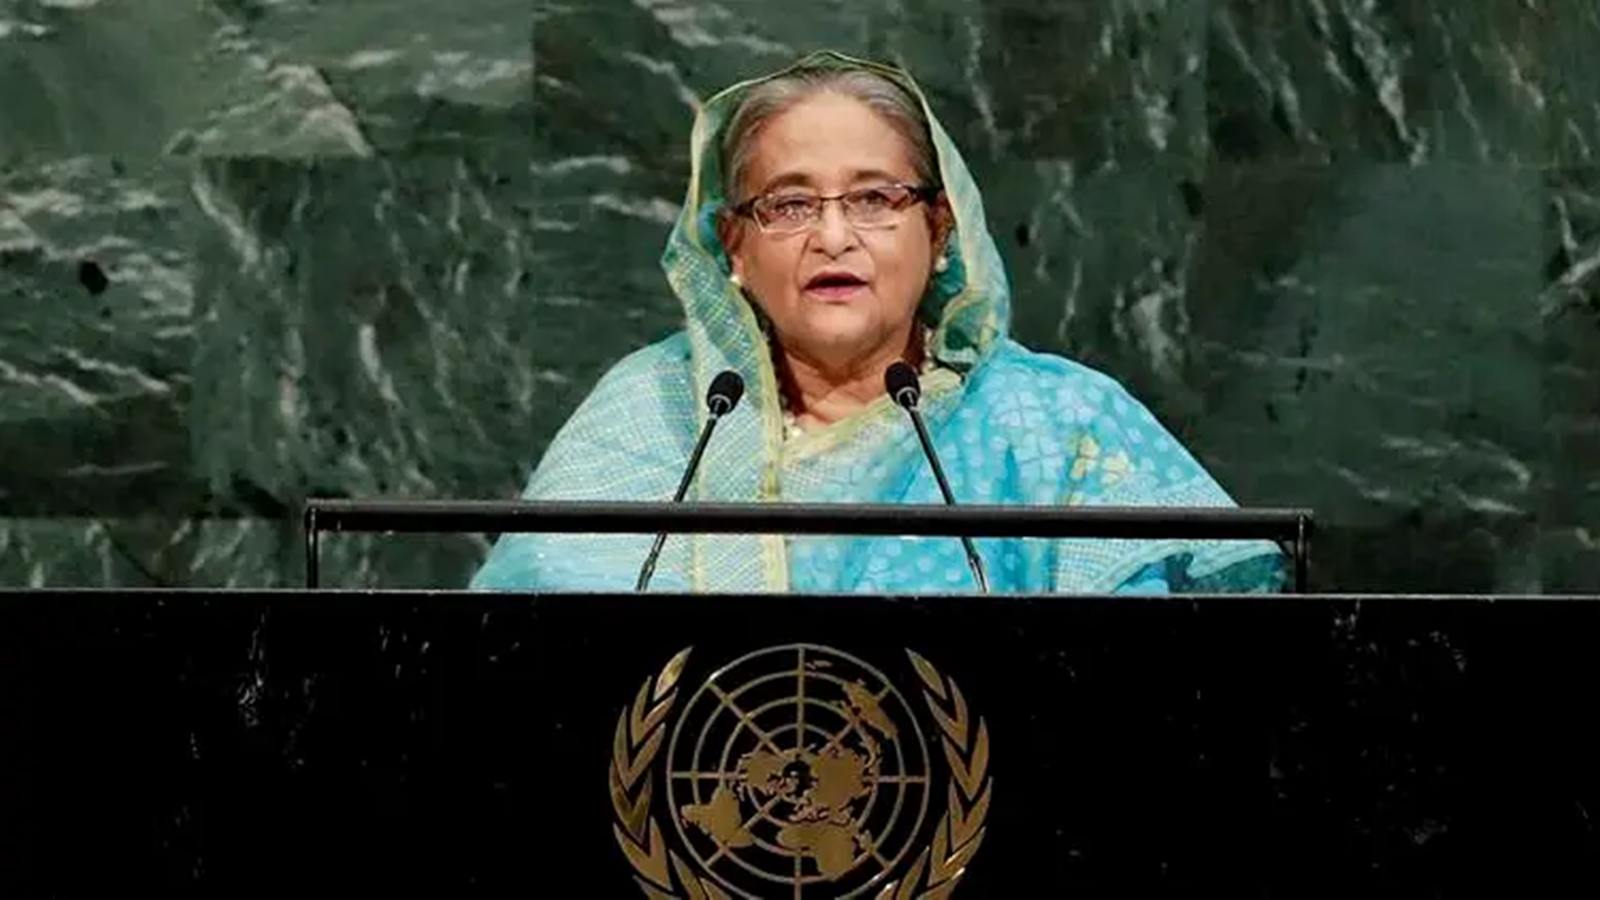 Decoding Bangladesh election: Sheikh Hasina’s manifesto, economic challenges, and the crucial West factor